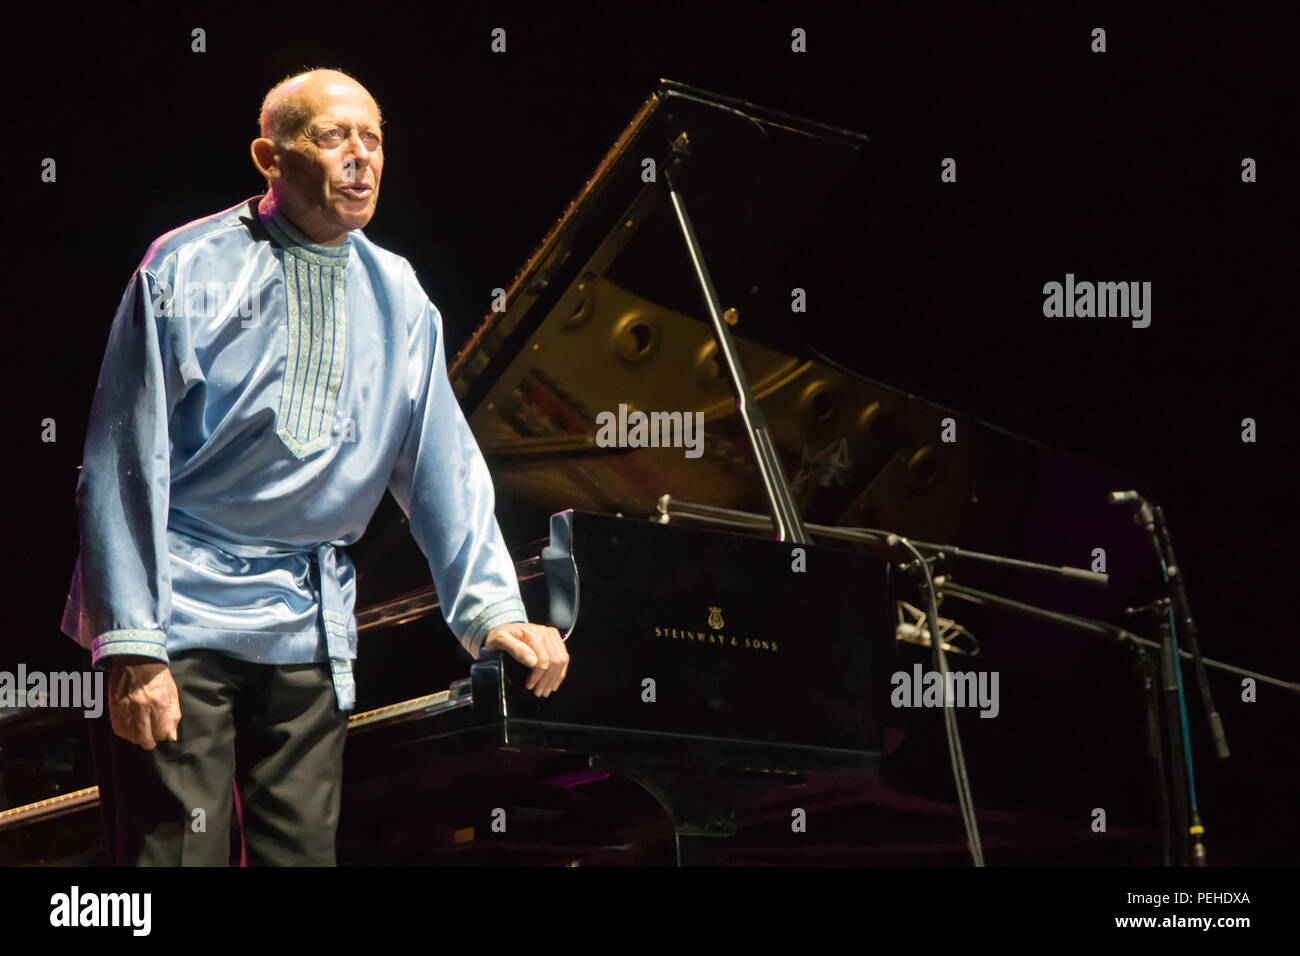 Budapest. 15th Aug, 2018. Australian concert pianist David Helfgott performs during his concert in Papp Laszlo Sports Arena in Budapest, Hungary on Aug. 15, 2018. Credit: Attila Volgyi/Xinhua/Alamy Live News Stock Photo